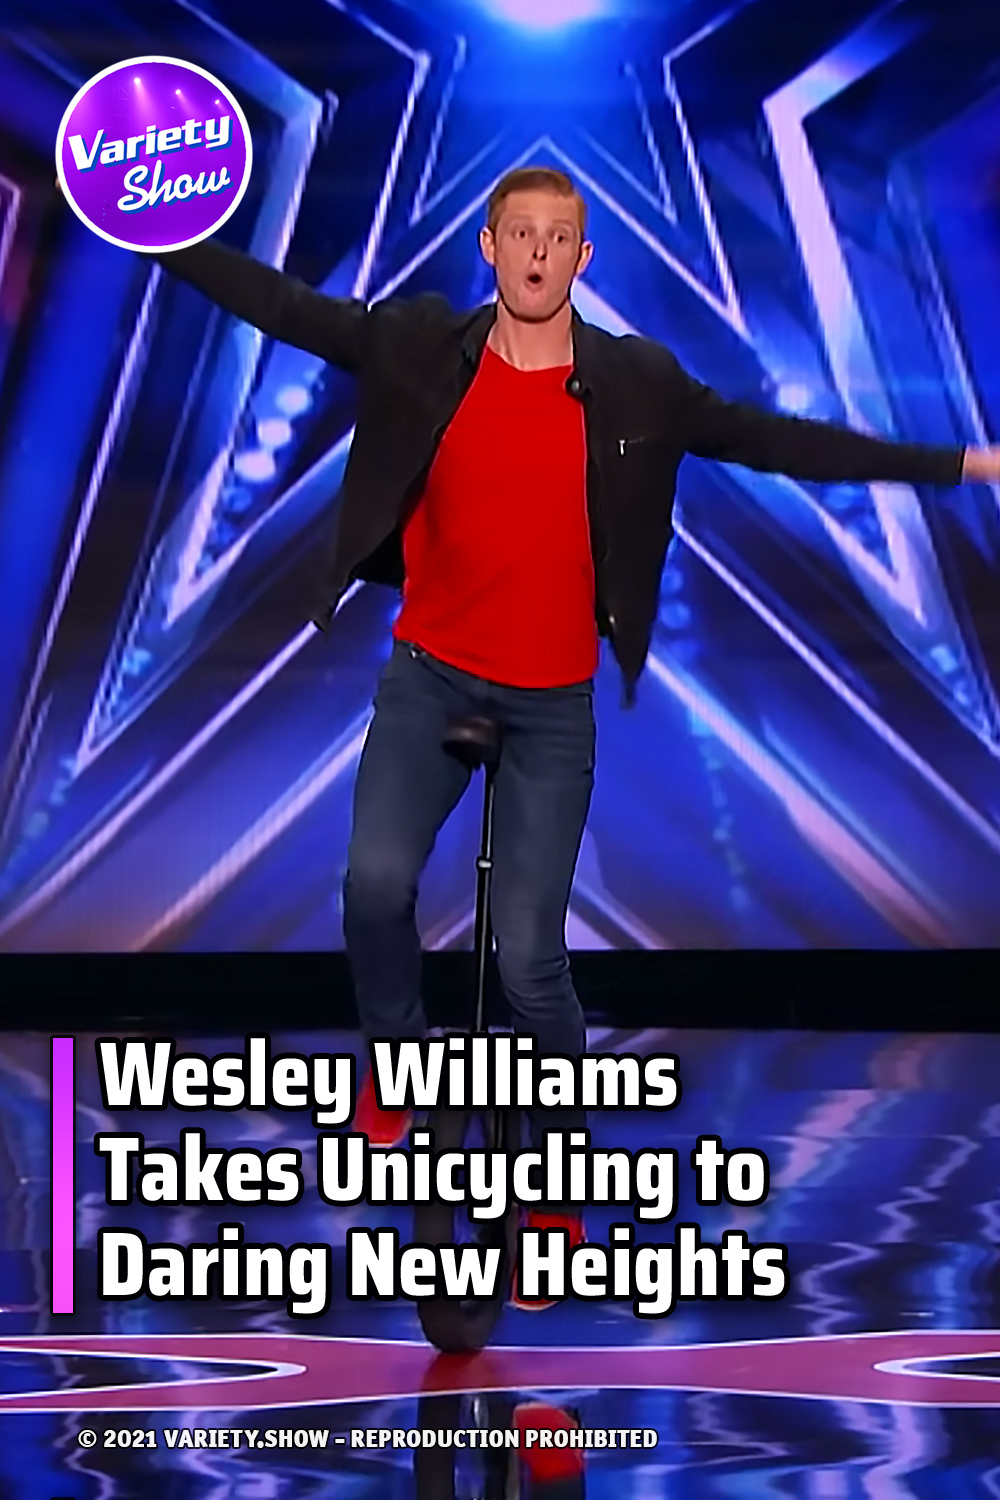 Wesley Williams Takes Unicycling to Daring New Heights